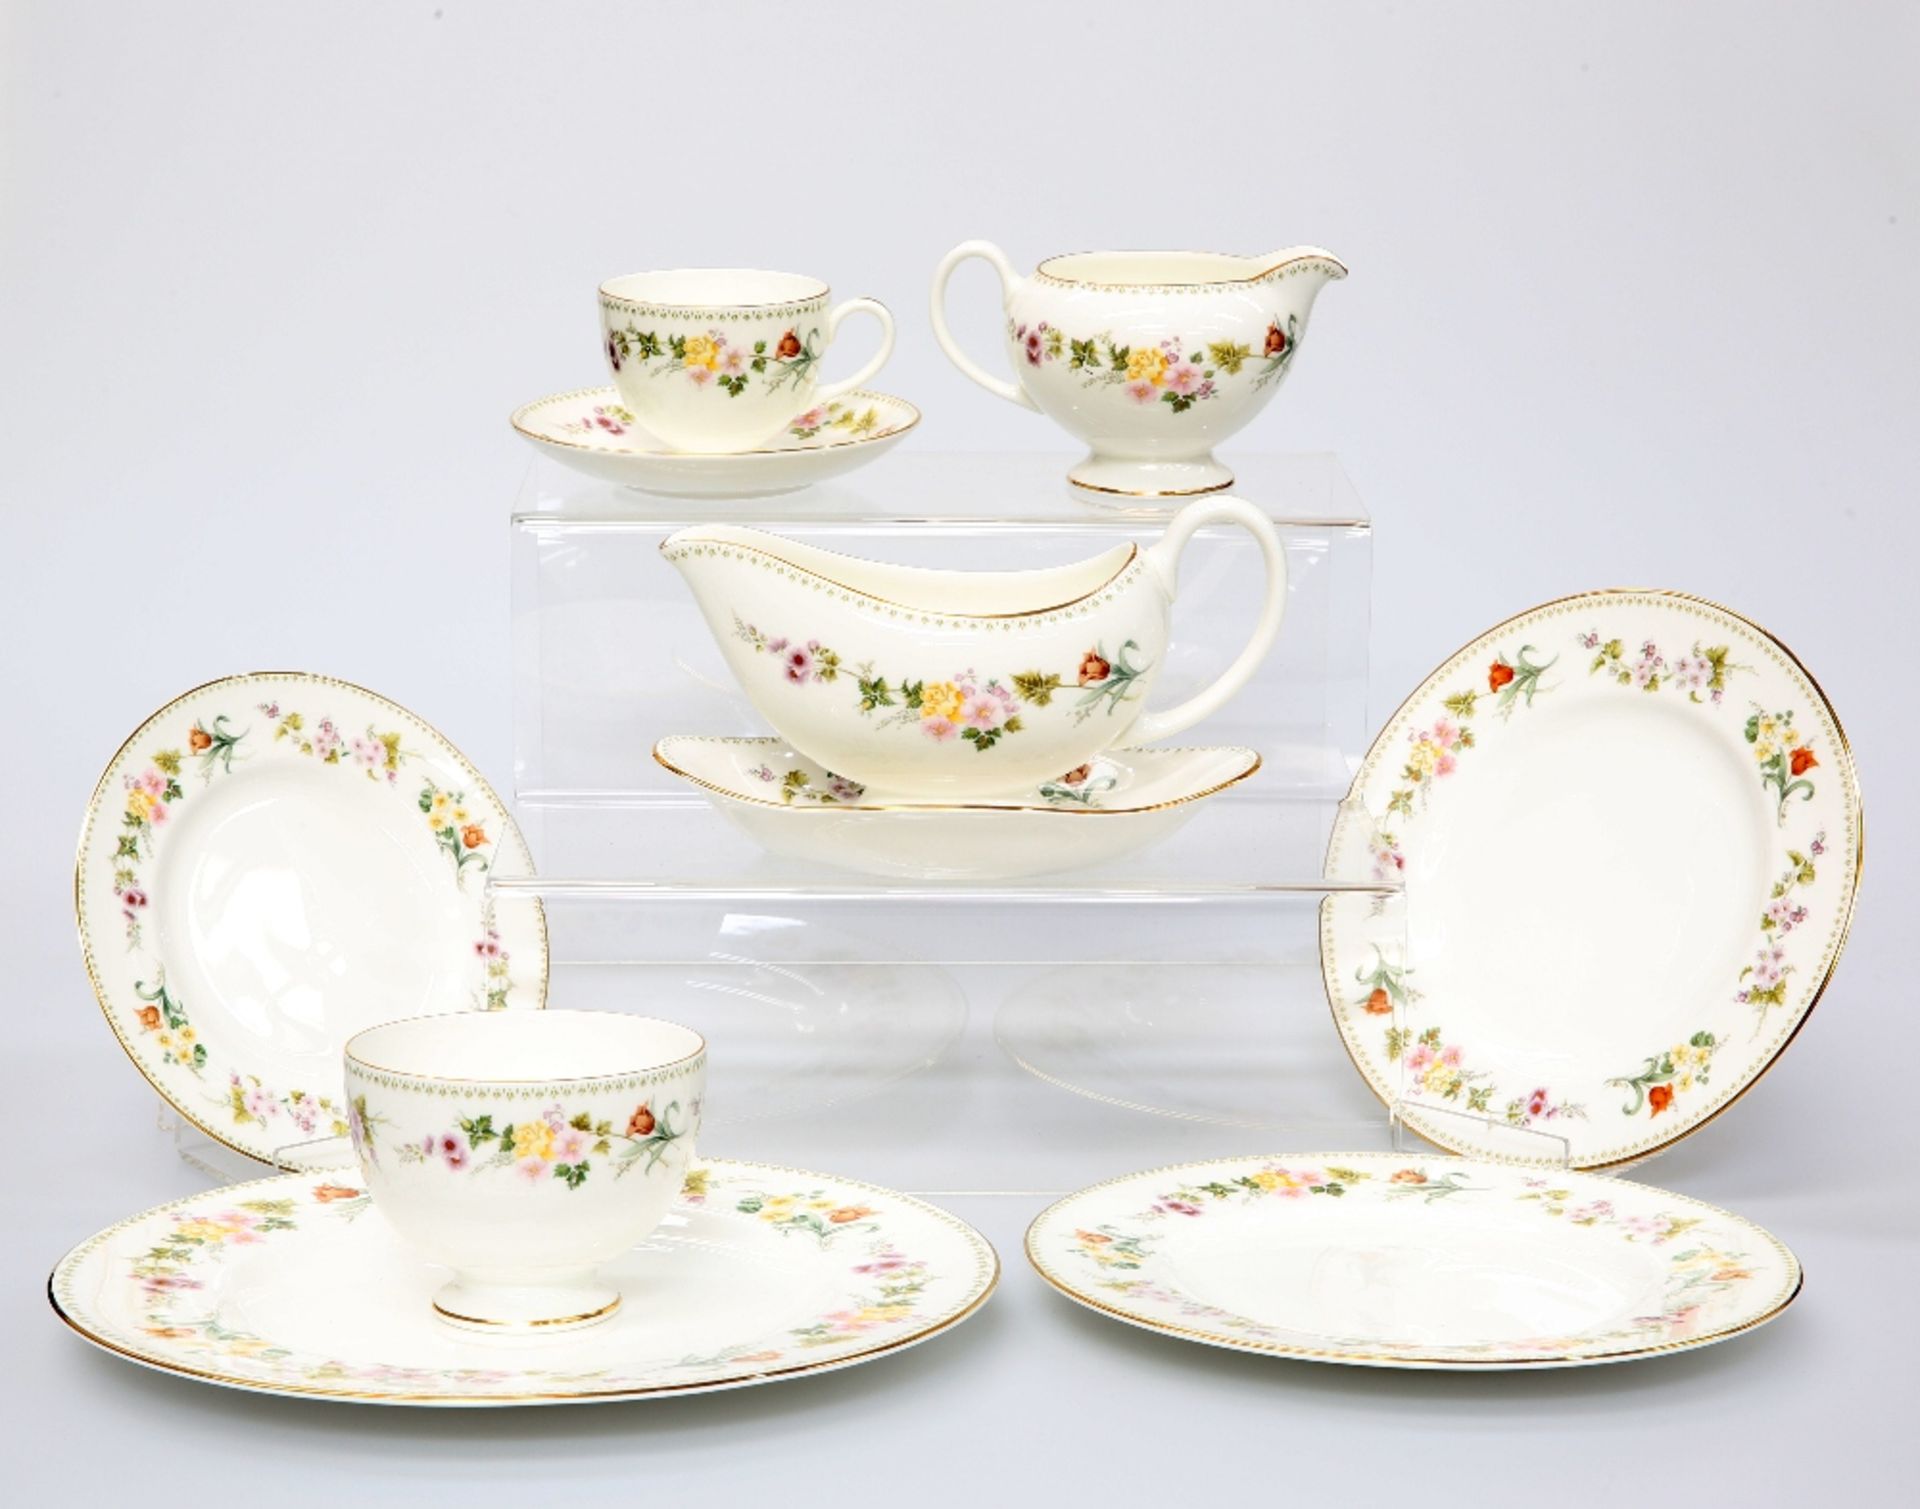 A WEDGWOOD "MIRABELLE" PATTERN DINNER AND TEA SERVICE